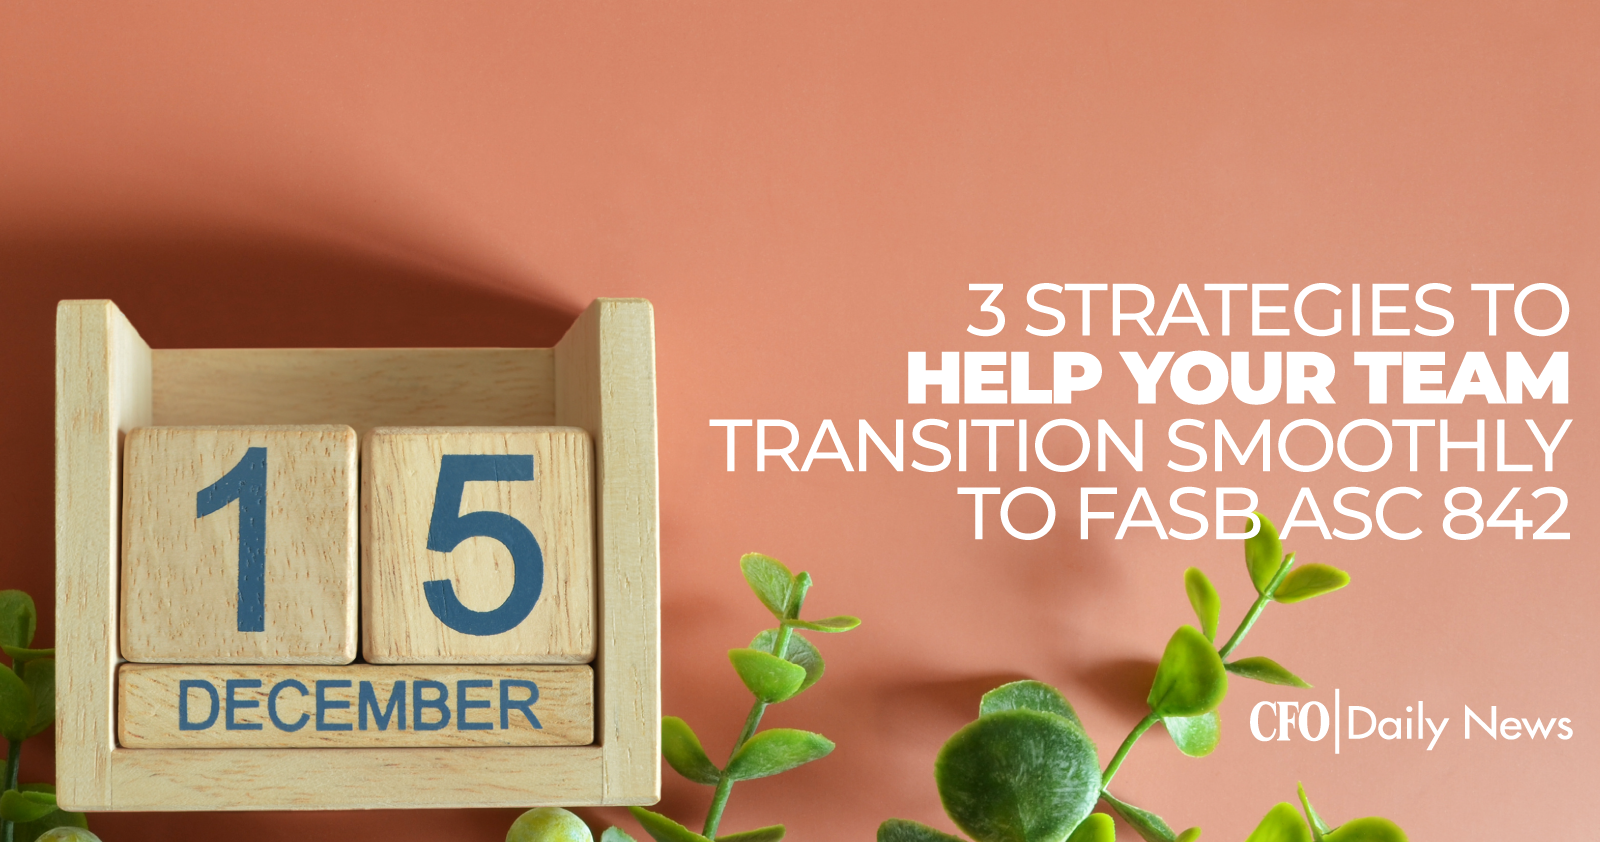 3 strategies to help your team transition smoothly to FASB ASC 842